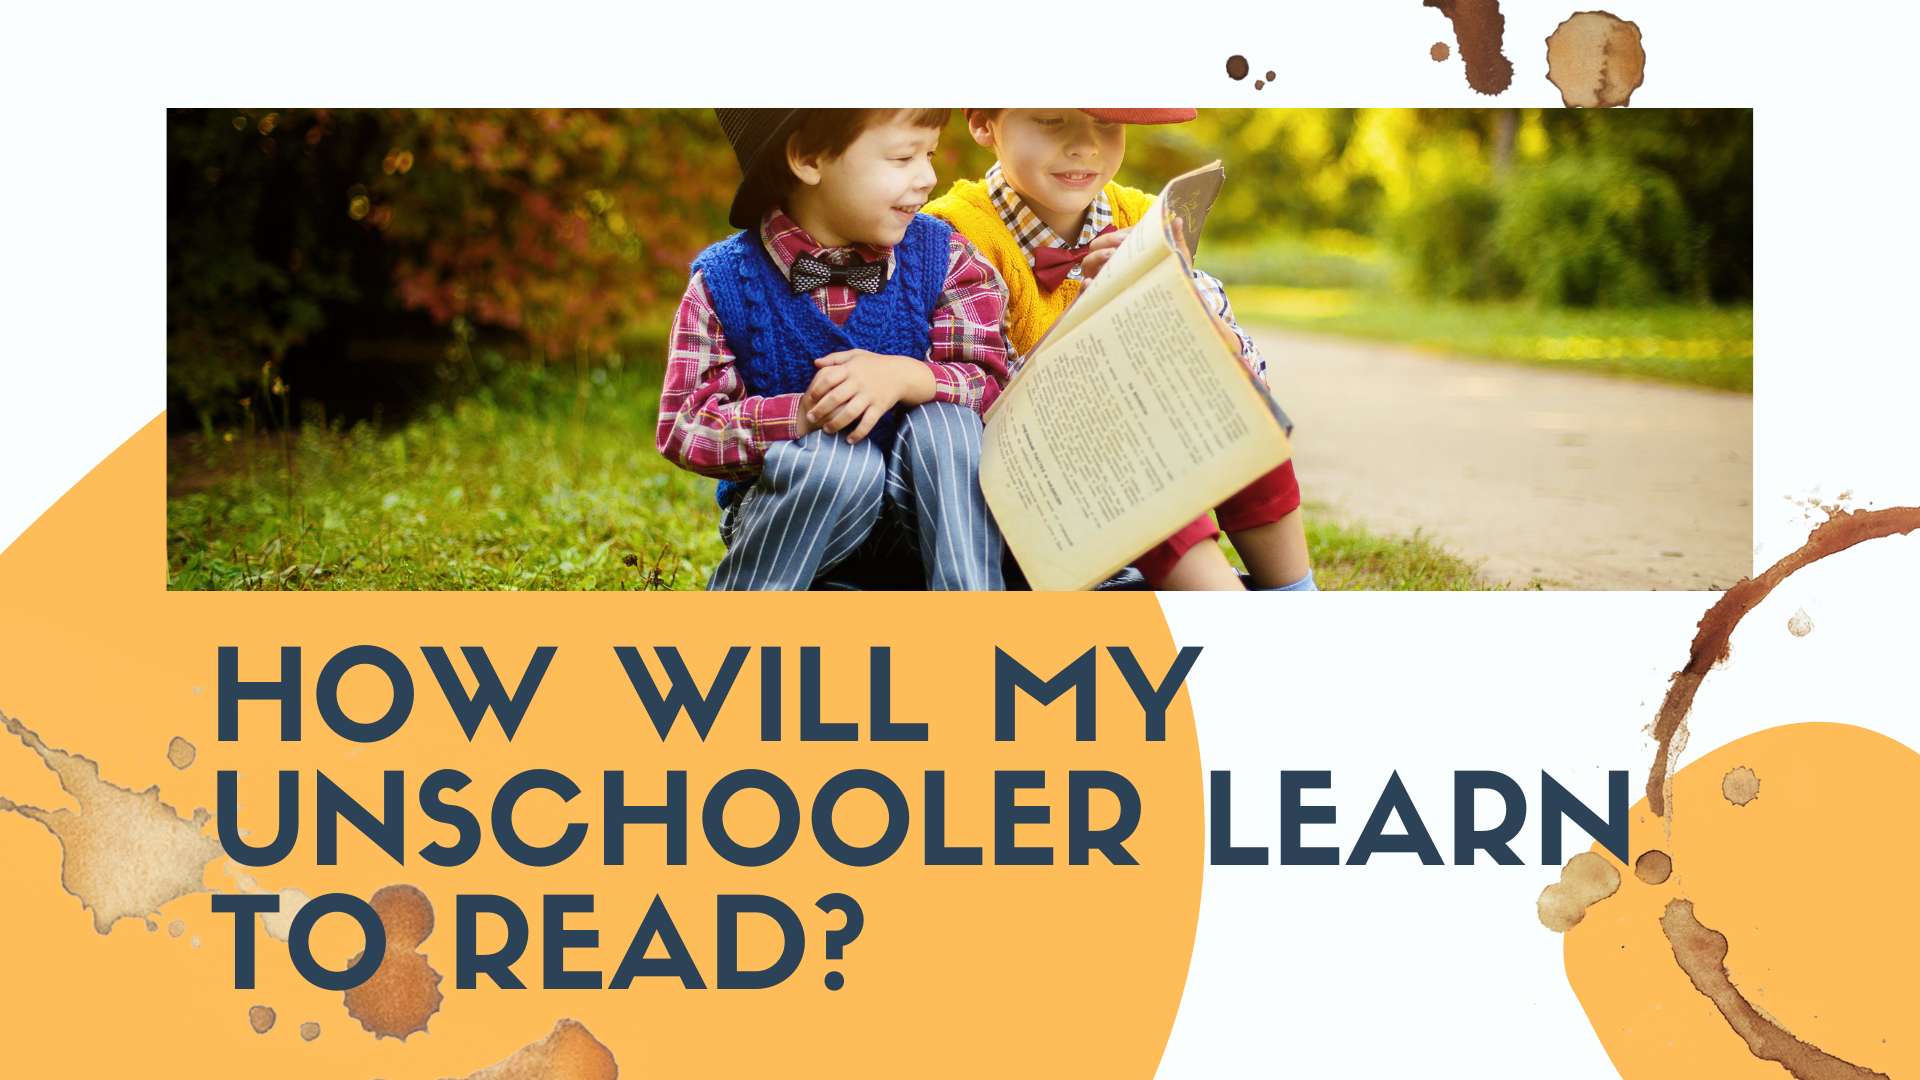 How Will My Unschooler Learn to Read?